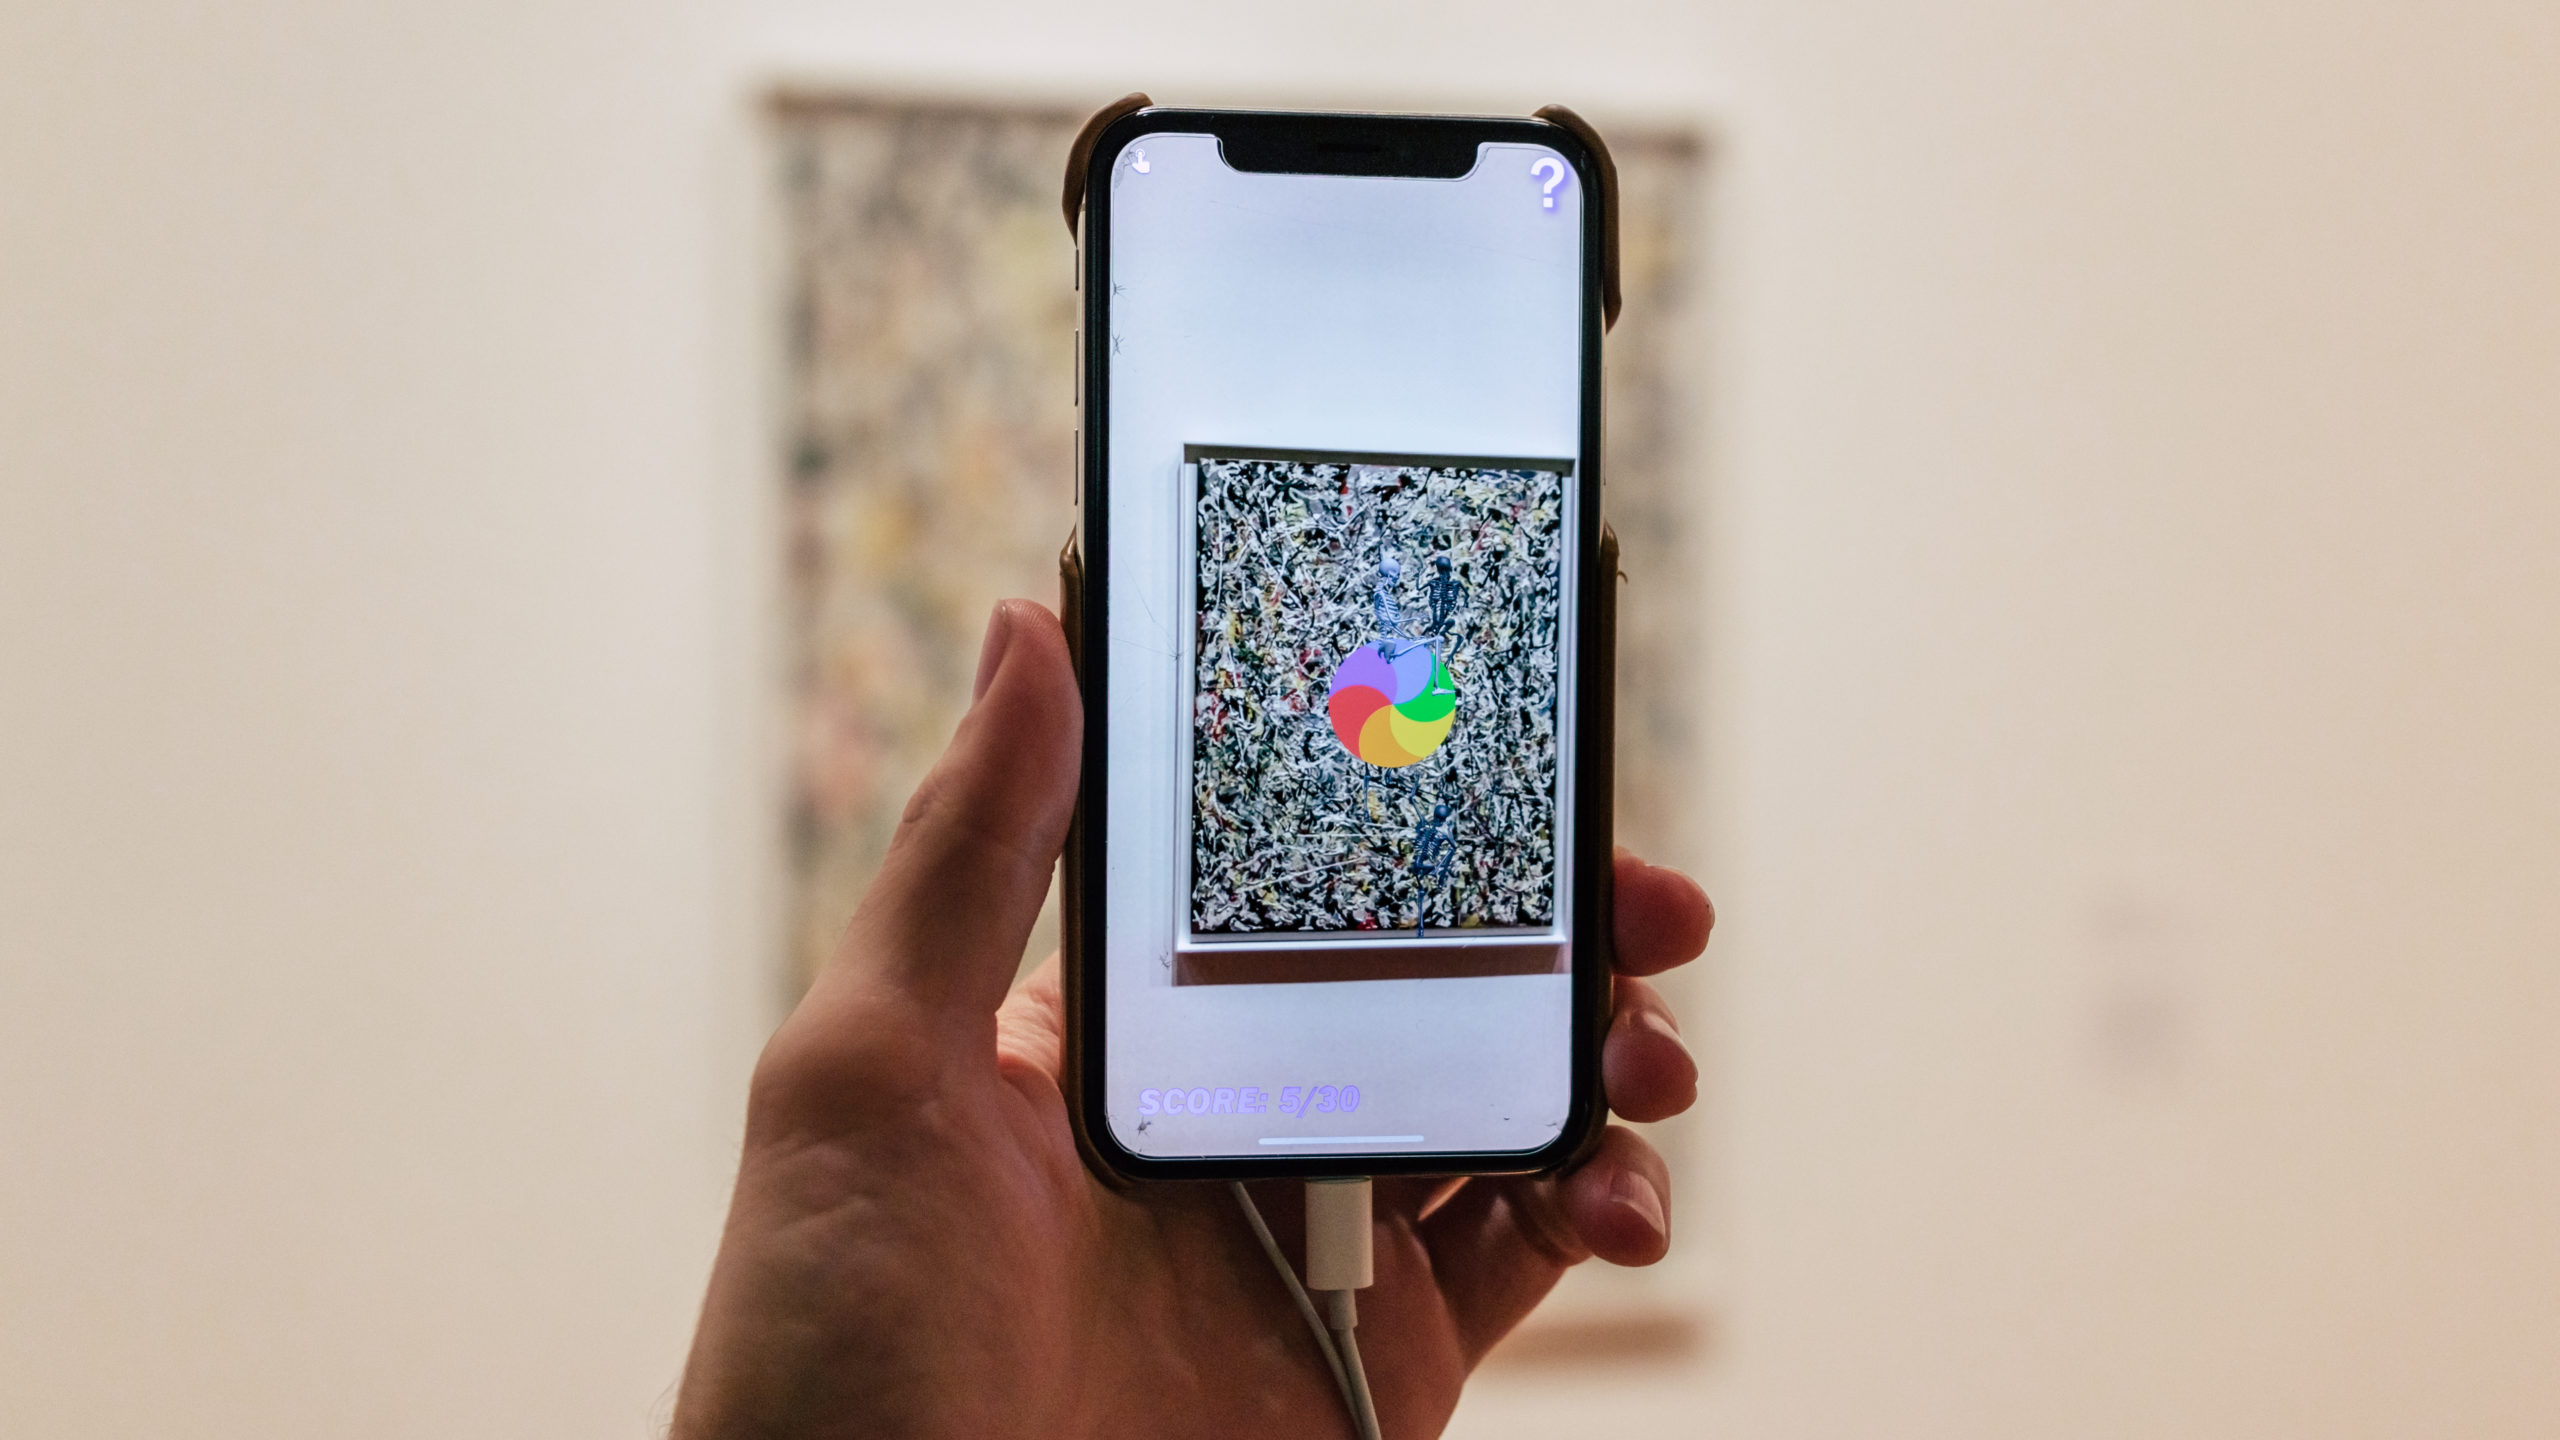 Artists Protest Elite Art World With Unauthorised AR Gallery At The MoMA